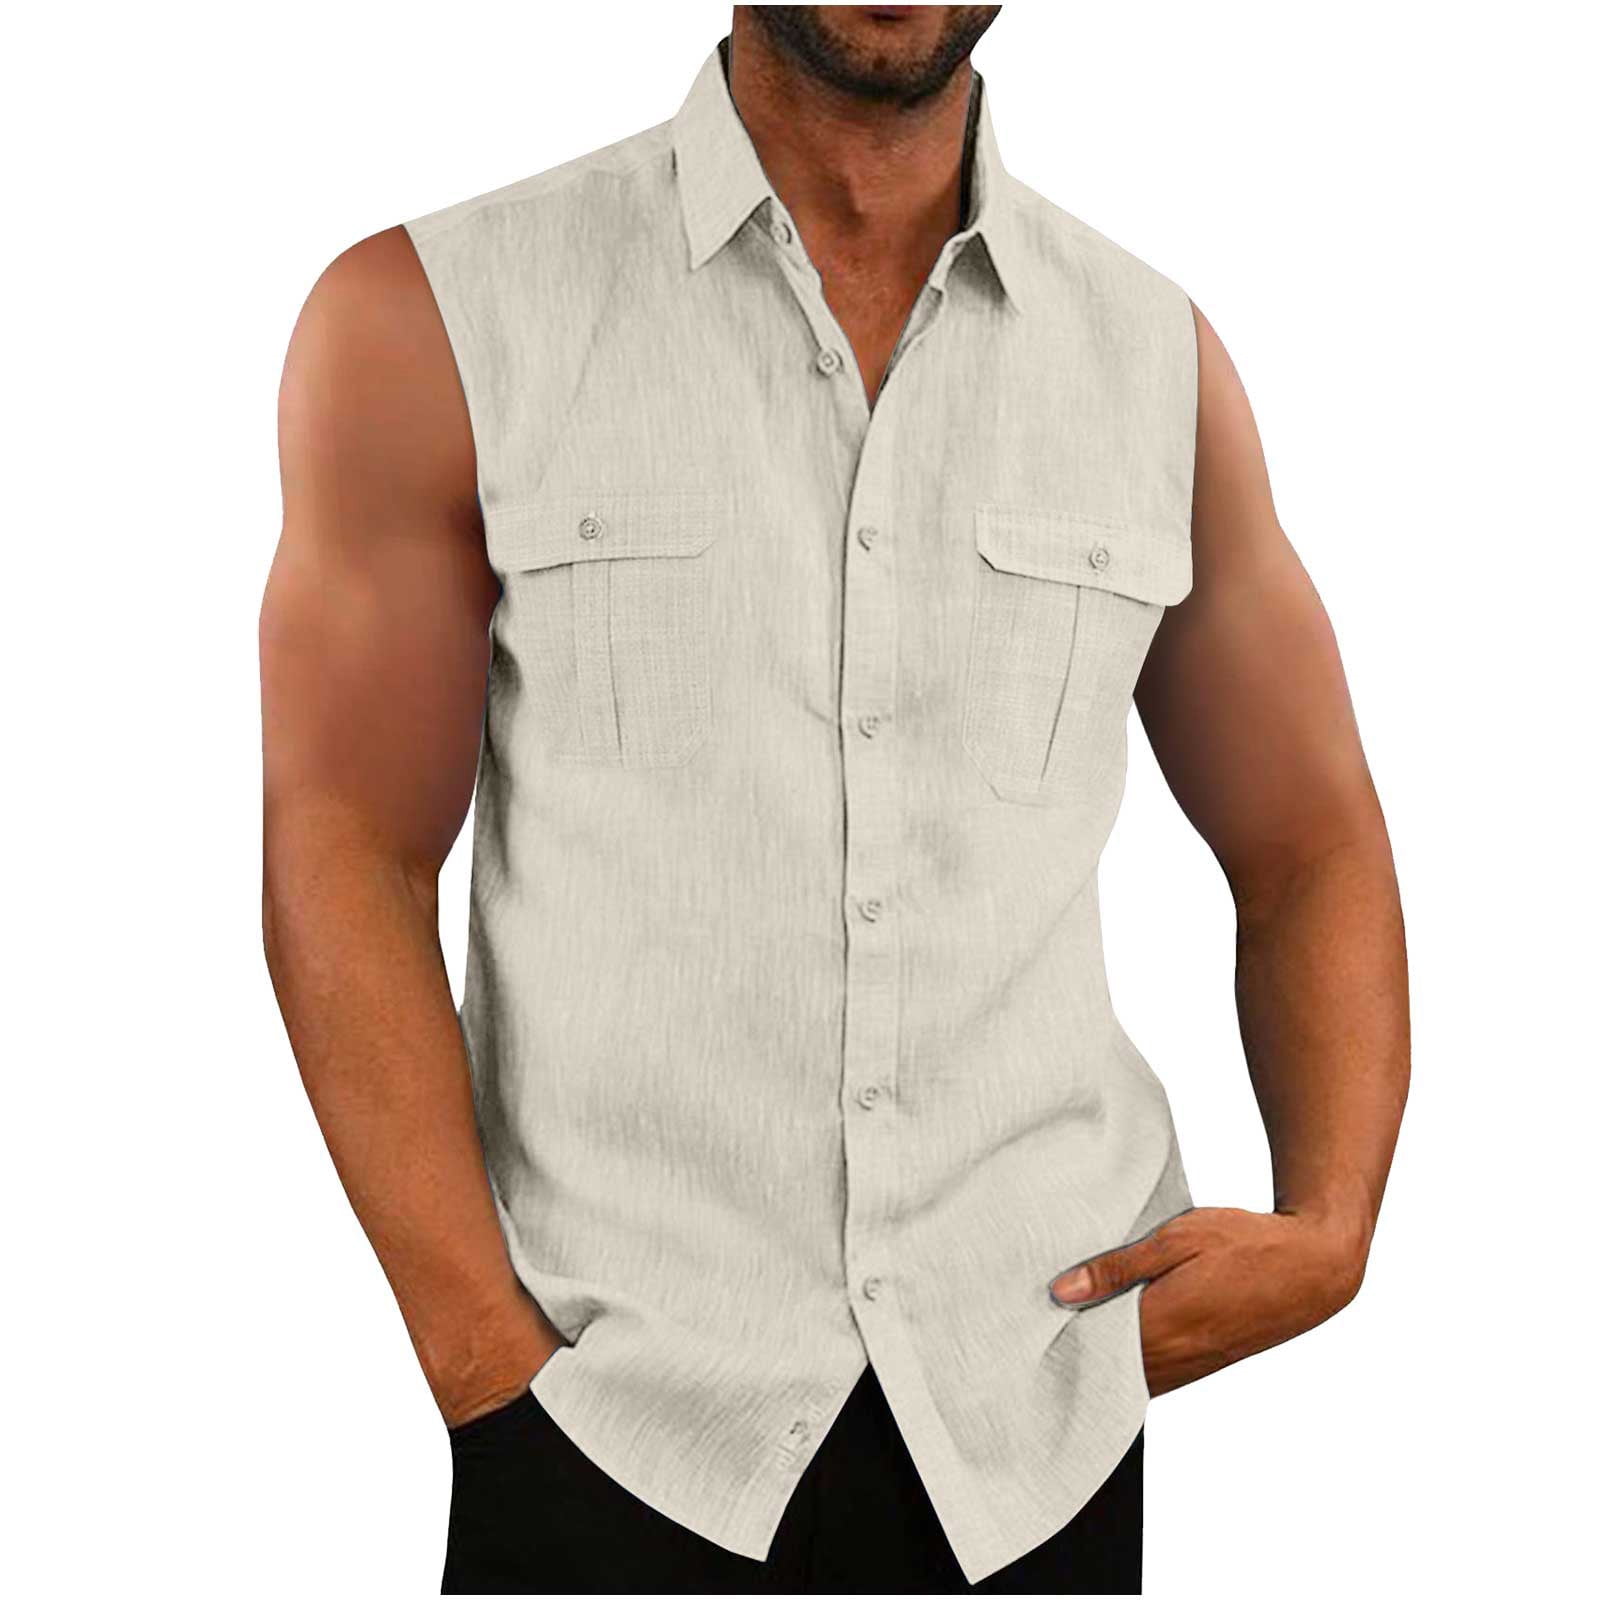 ZCFZJW Men's Linen Sleeveless Shirts Casual Button Down Beach Gym Yoga Tank  Top Summer Basic Solid Workout Tee Shirt Vest with Double Pockets Khaki XL